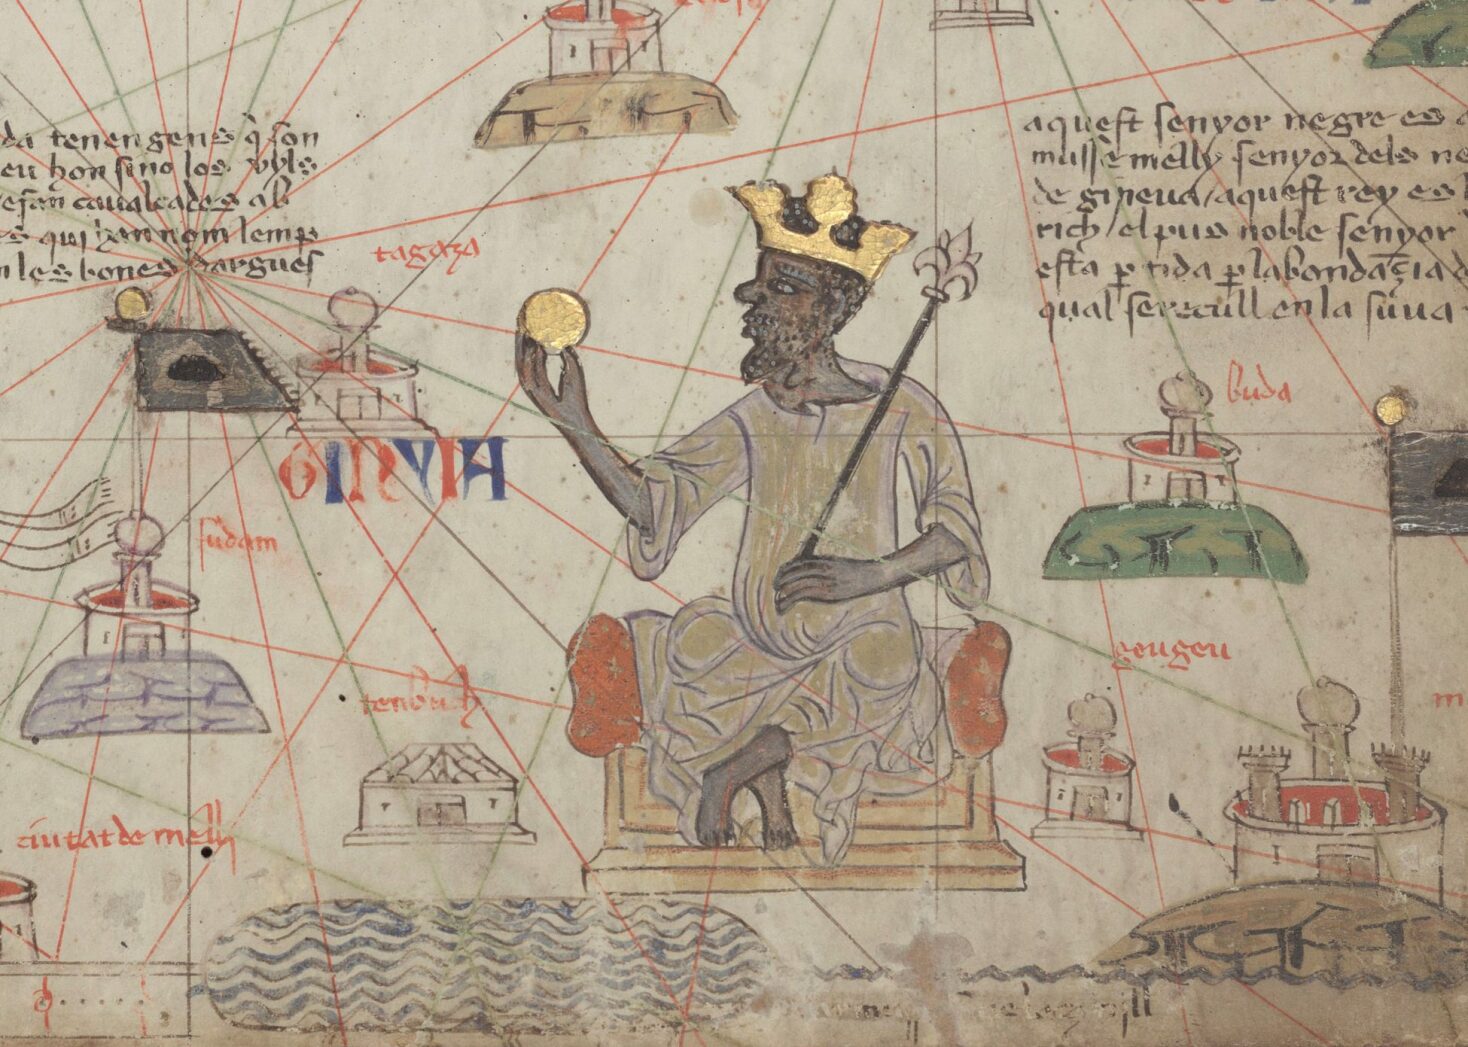 Mansa Musa: The Richest Human in History, How’d He Lived and Died